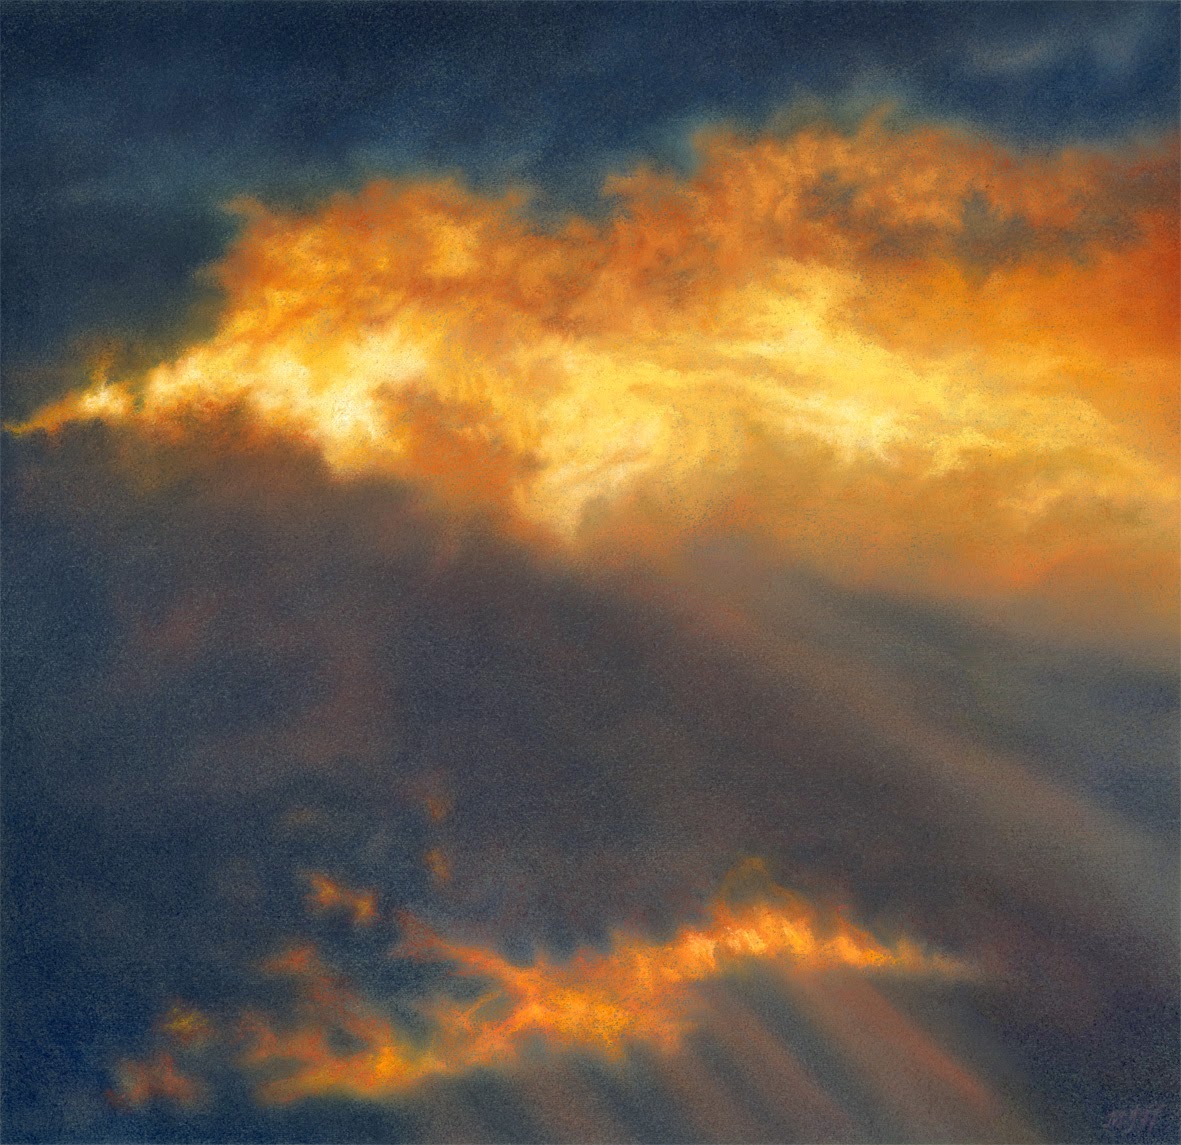 Fiery Skies-Michael Howley Artist. A signed limited edition print from an original soft pastel painting